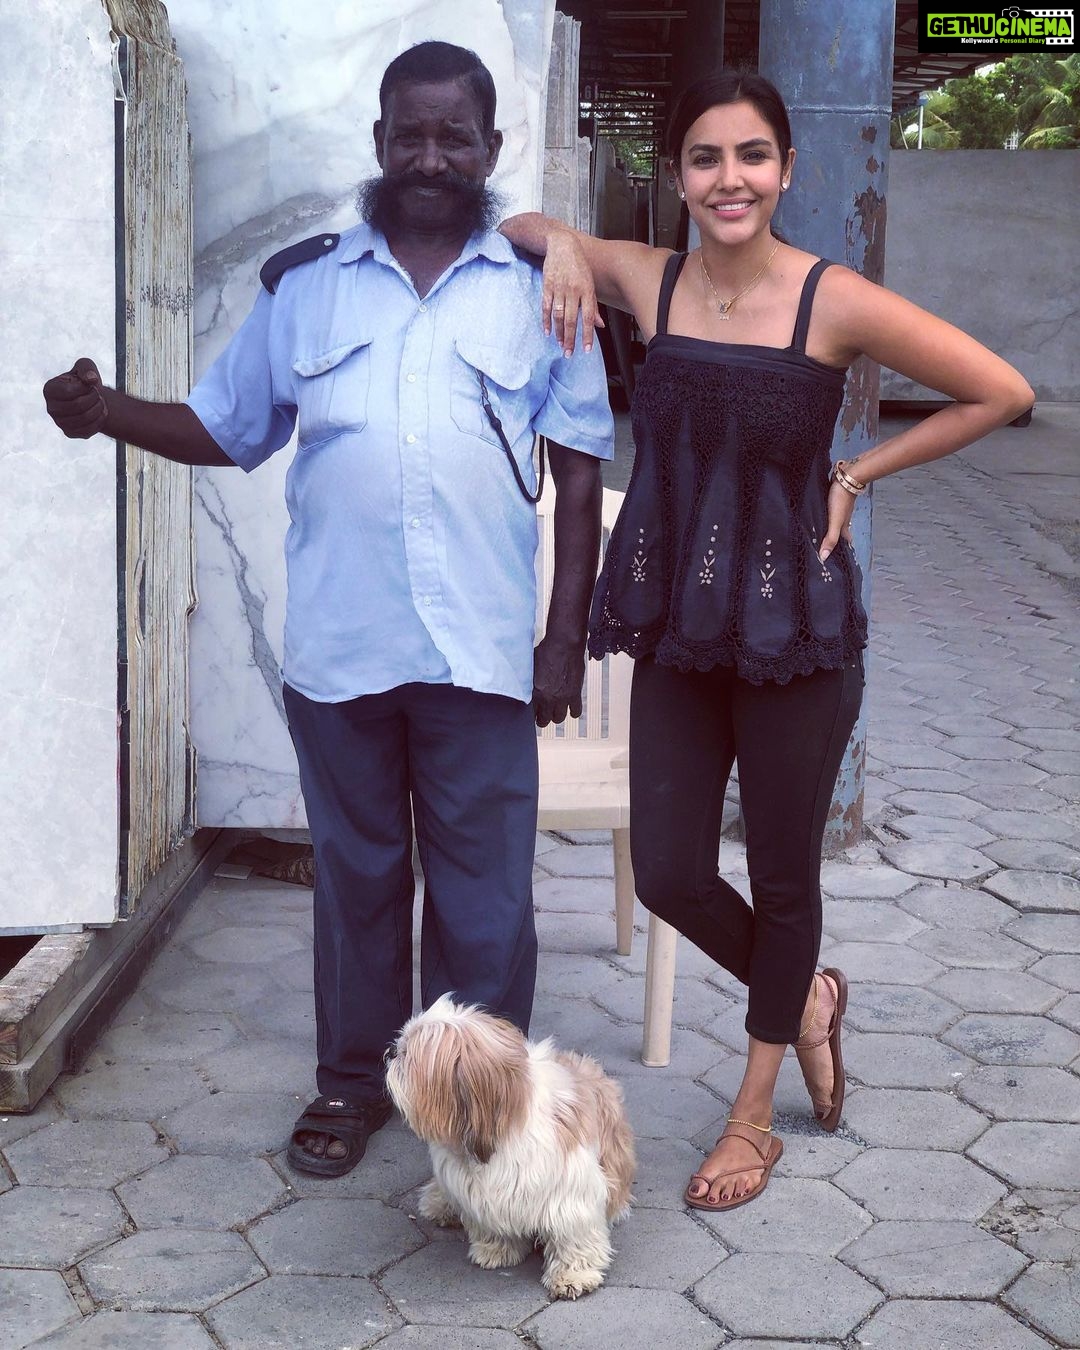 Priya Anand - 133K Likes - Most Liked Instagram Photos